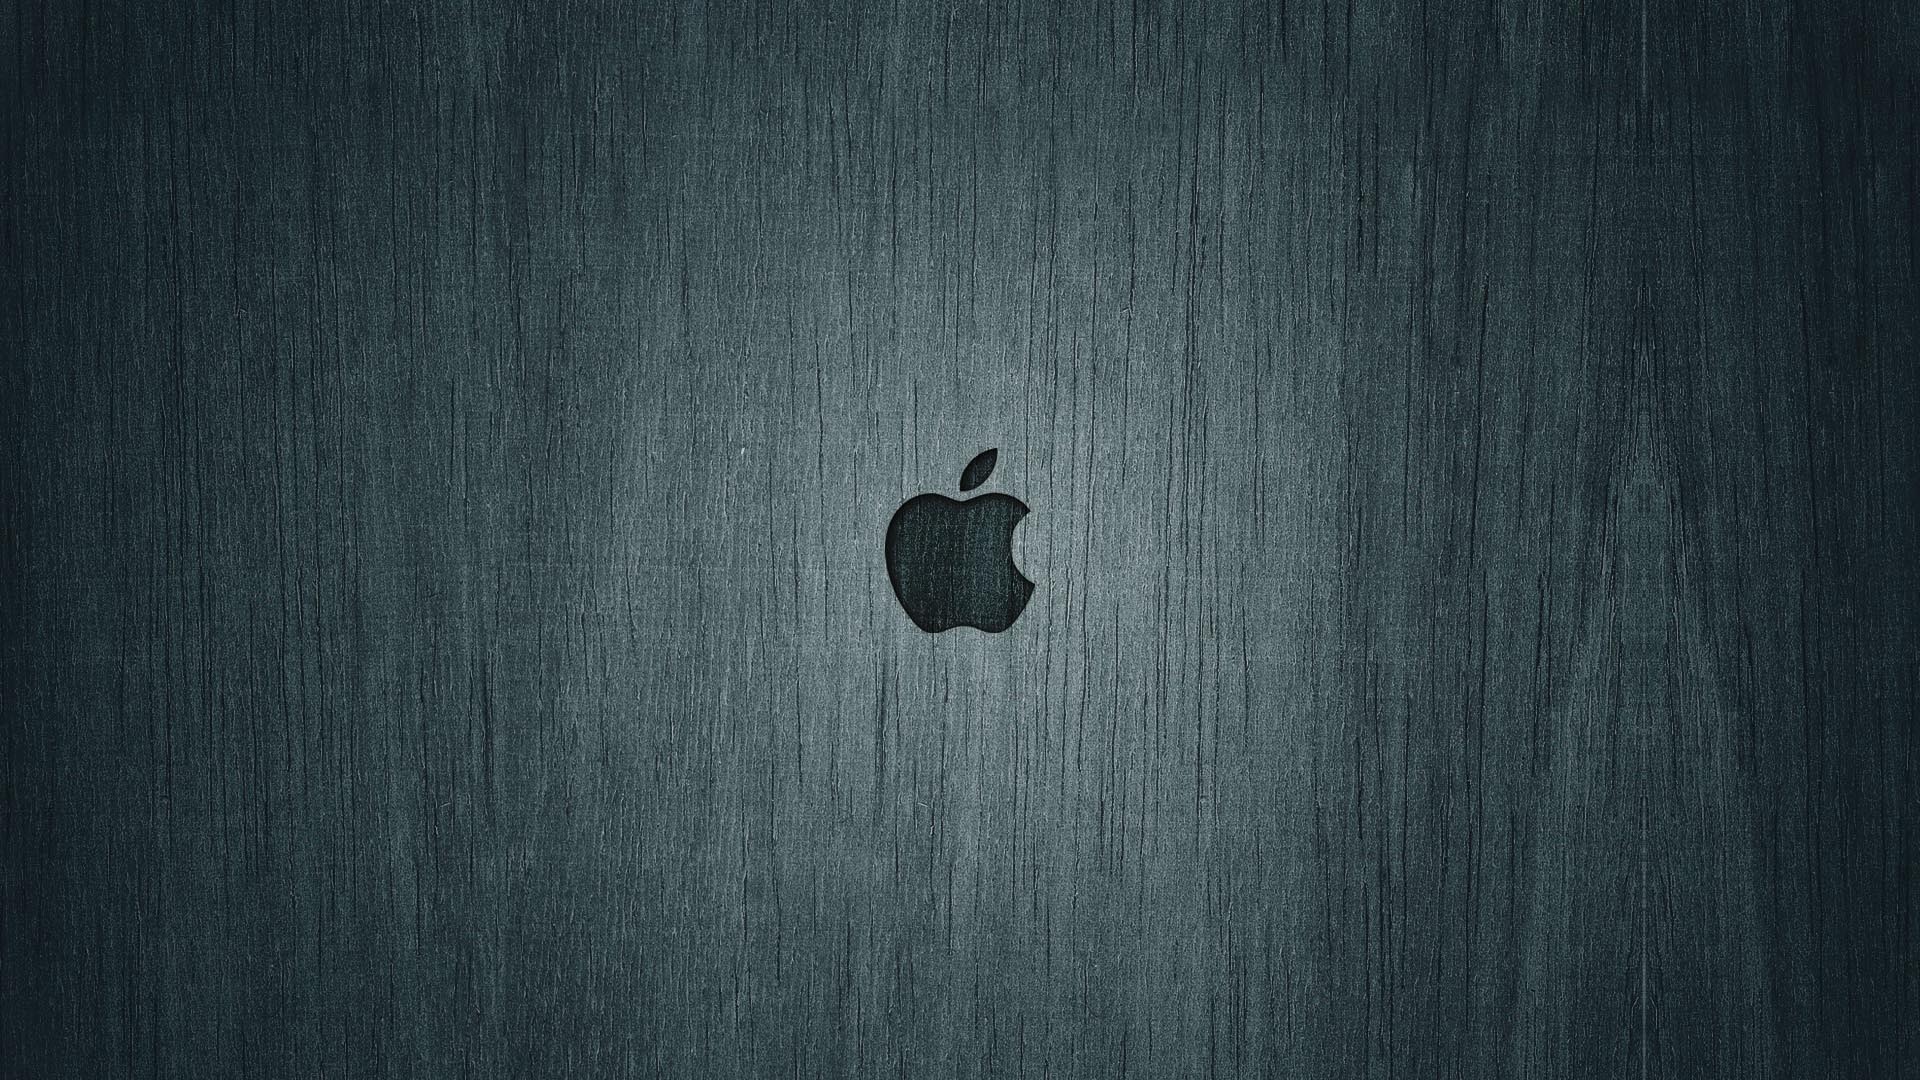 Full Hd Apple Wallpapers Top Free Full Hd Apple Backgrounds Wallpaperaccess